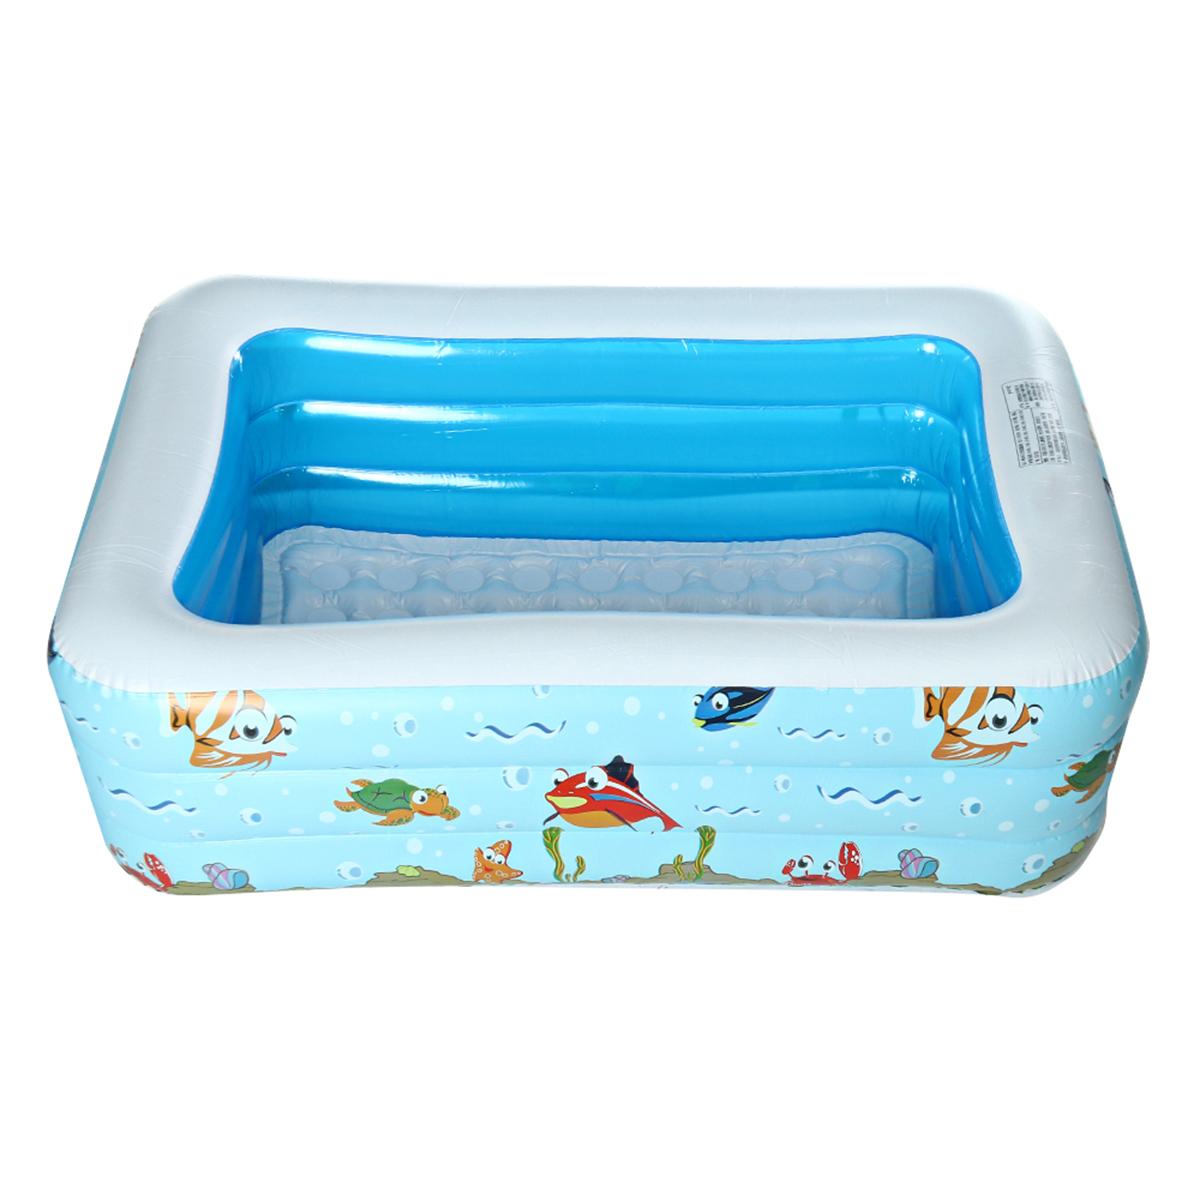 150x110x50cm-Inflatable-Swimming-Pool-Summer-Outdoor-Garden-Family-Kids-Paddling-Pools-1697621-3